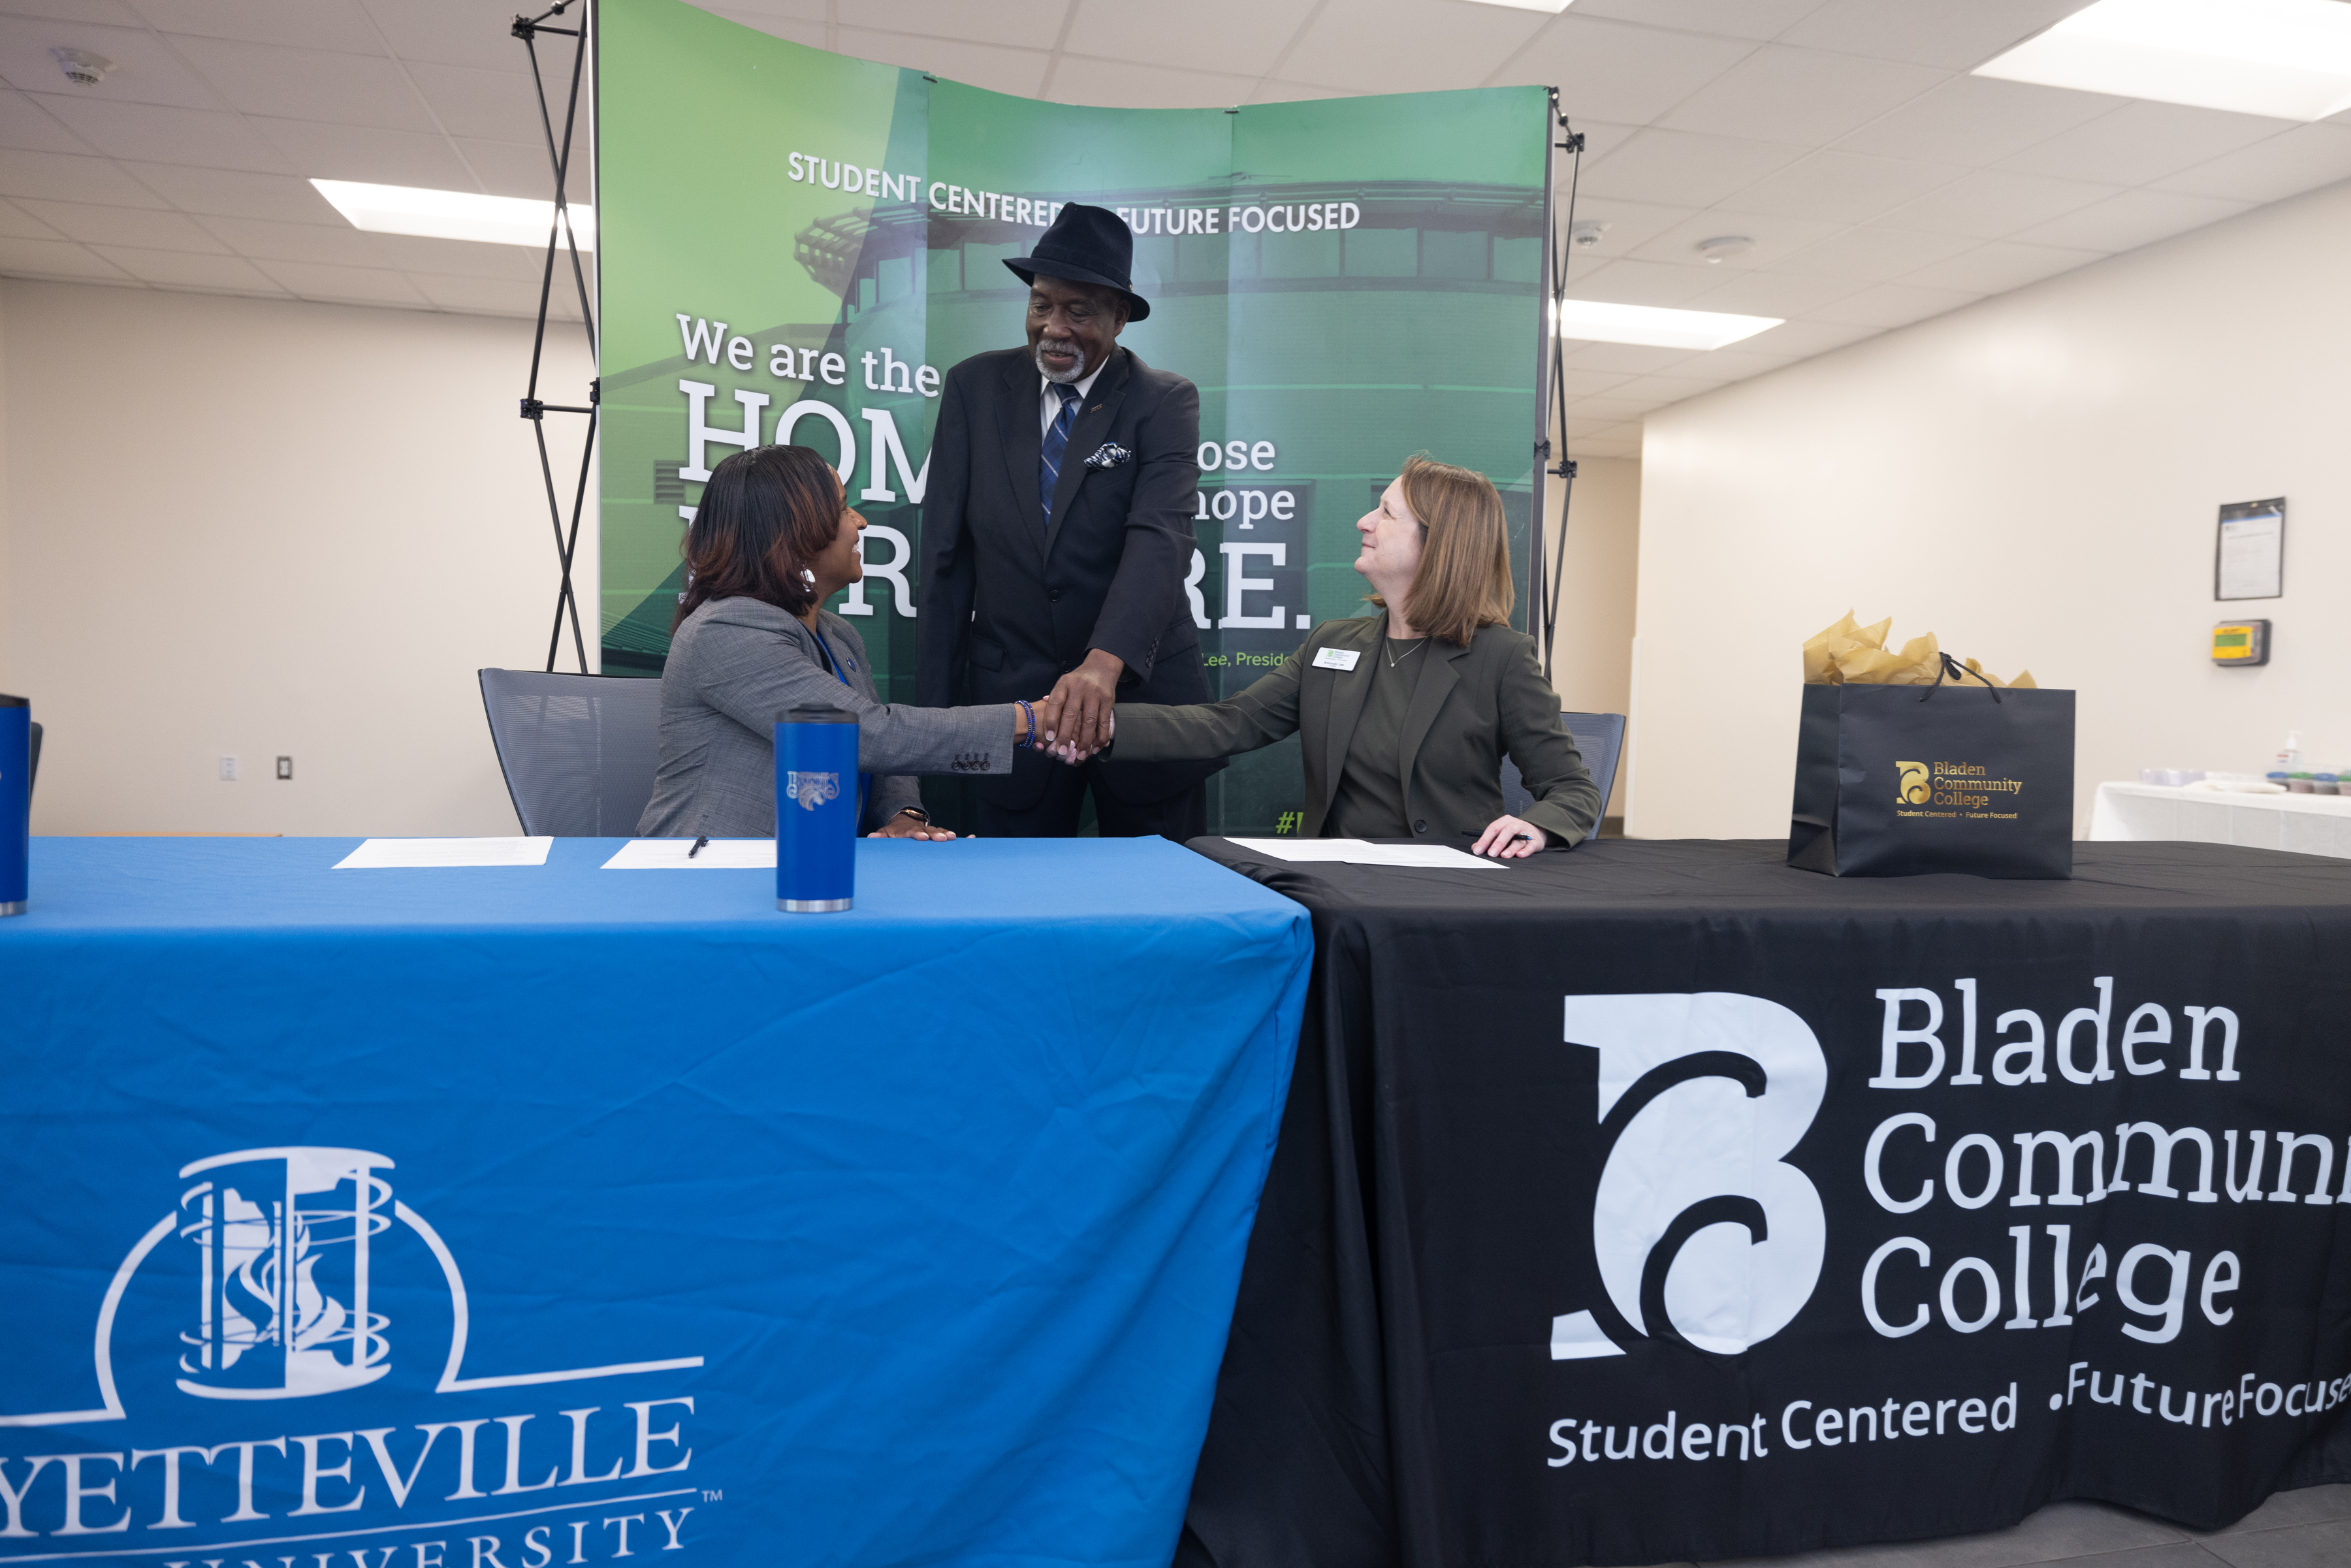 BCC President Amanda Lee, FSU Associate Vice Chancellor, and BCC Board of Trustee shake hands